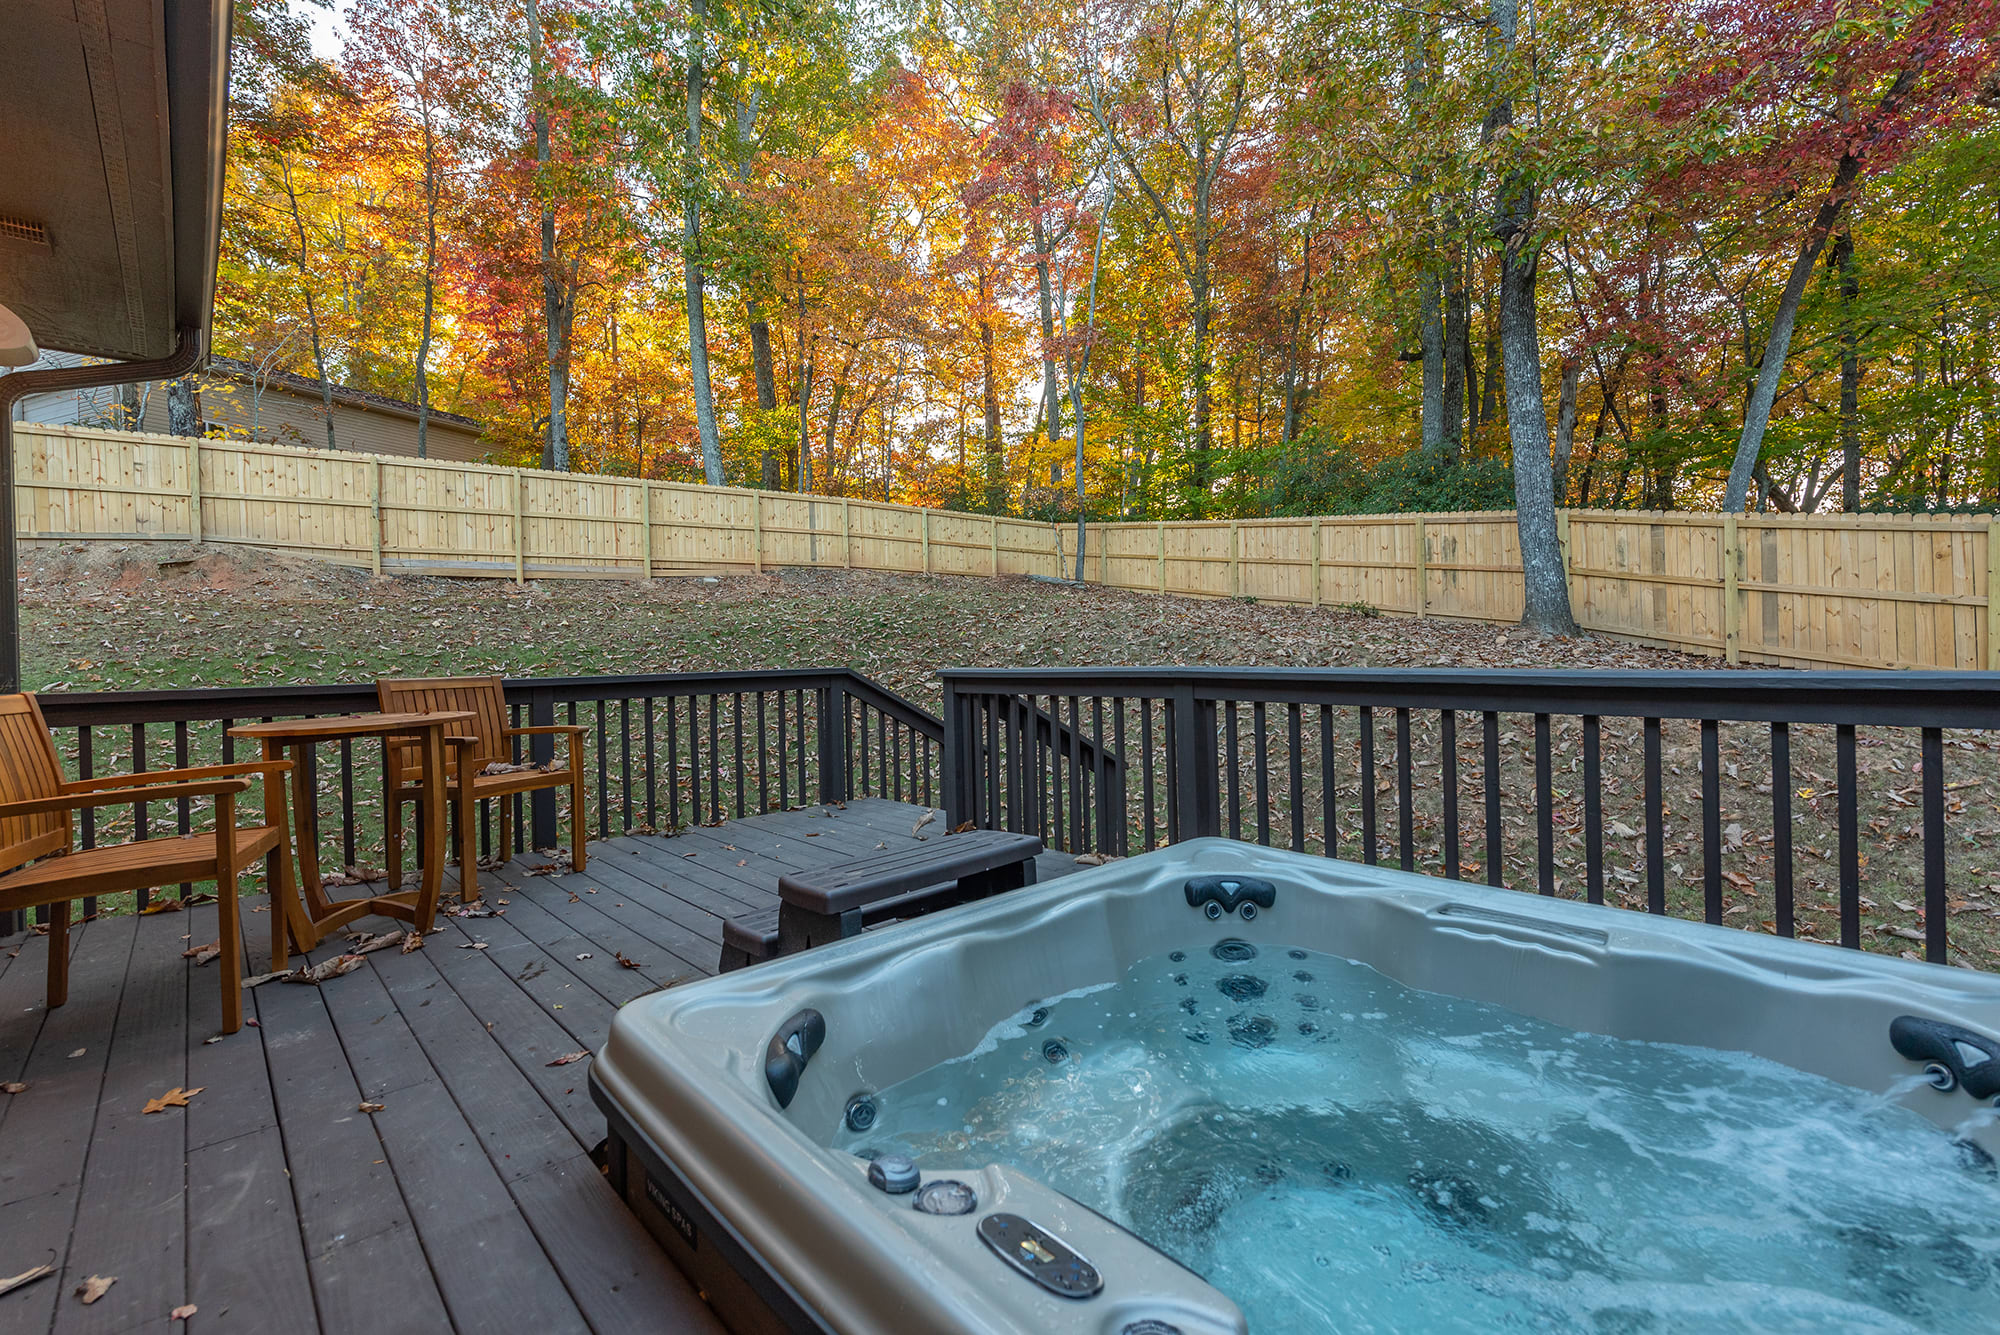 Relax in the hot tub with a fully fenced in yard!